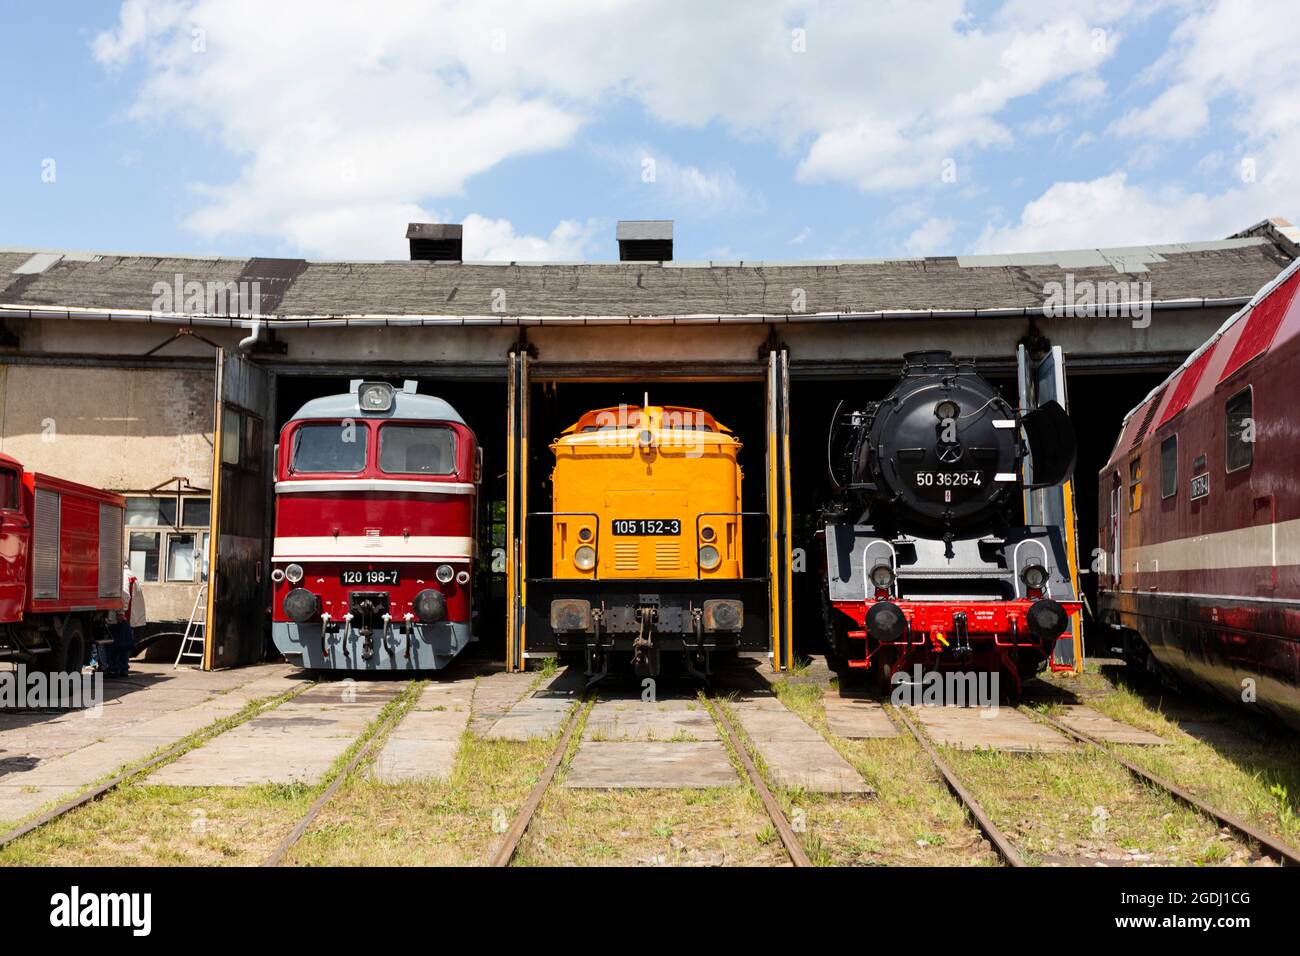 Electric railcars and a steam locomotive are standing in a locomotive shed in front of blue sky and clouds. Stock Photo